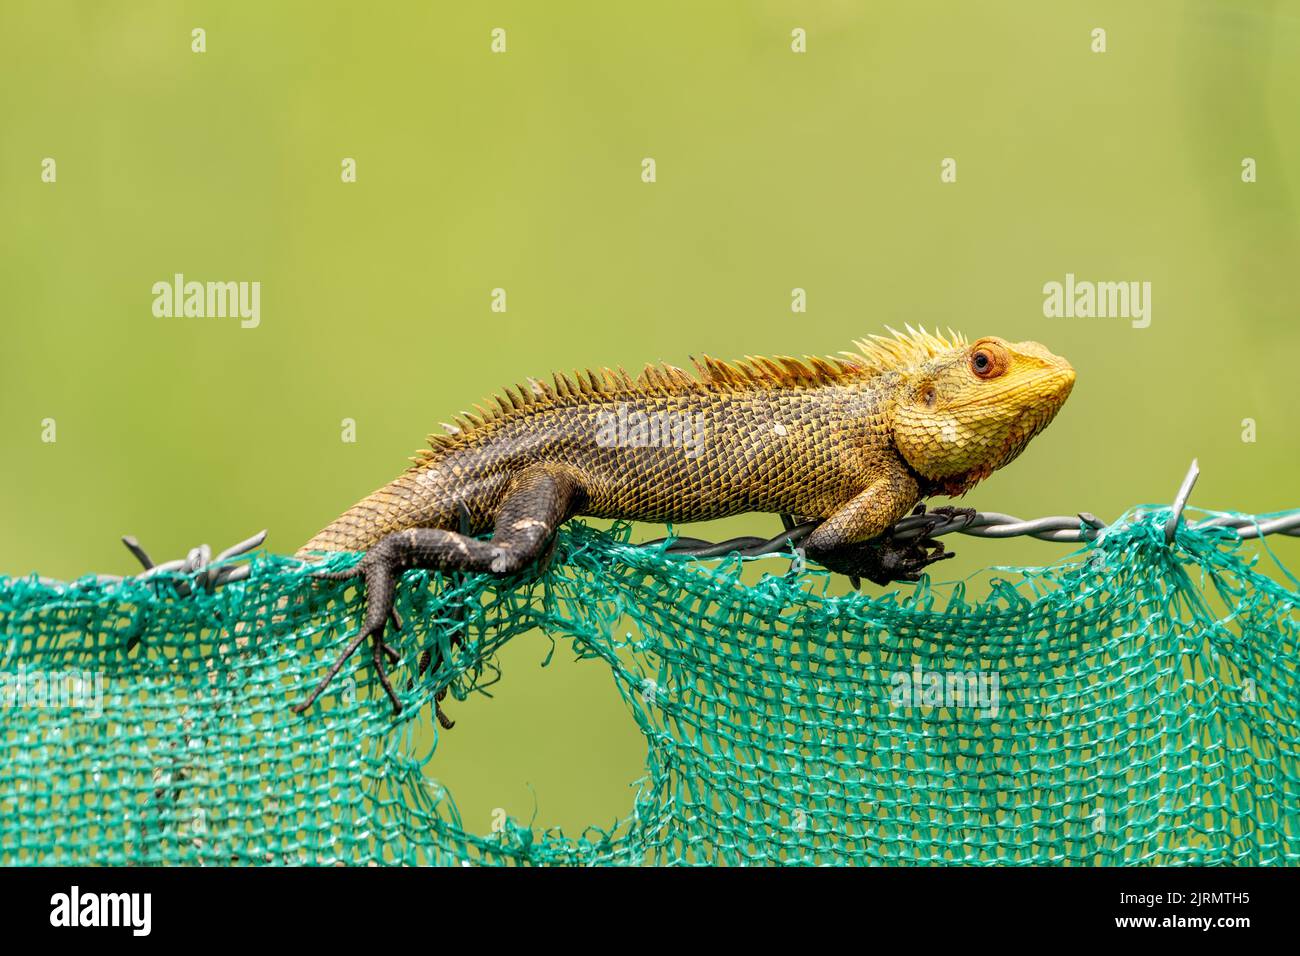 A closeup of a oriental garden lizard on a metal wire against a green background Stock Photo